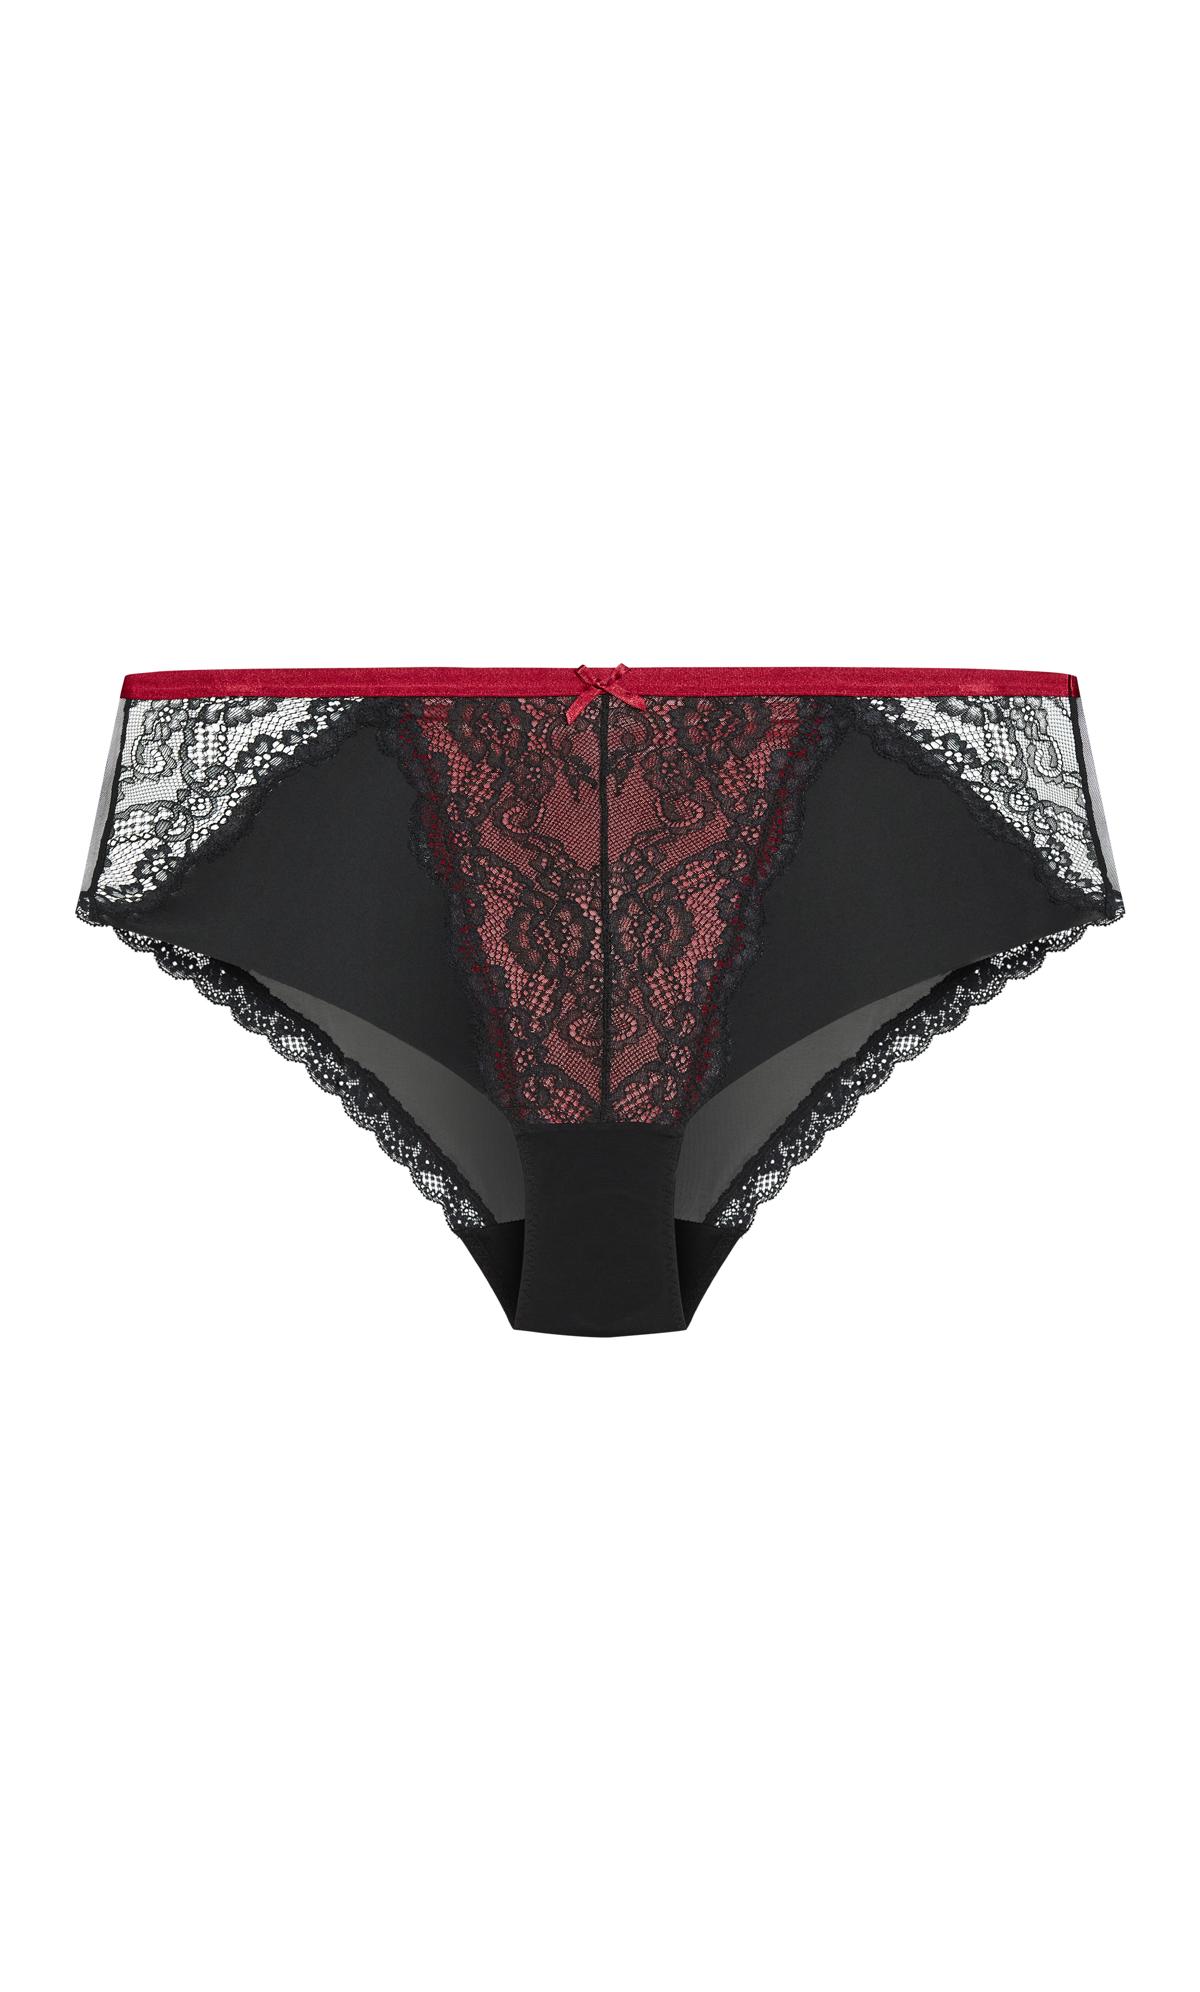 Bianca Chilli Pepper Red Mesh Lace shorty 3